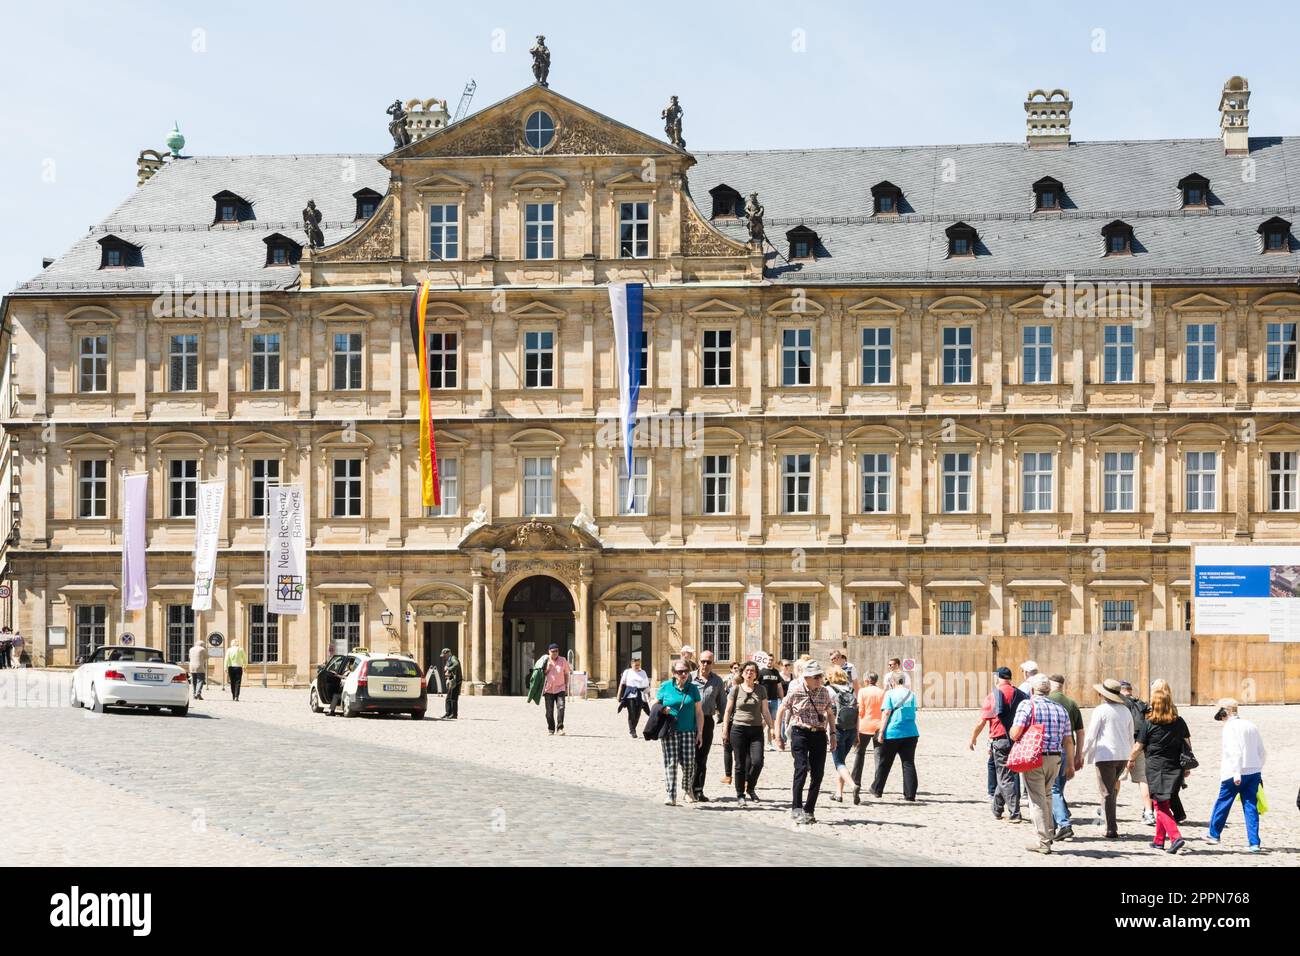 BAMBERG, GERMANY - MAI 6: Tourists at Neue Residenz in Bamberg, Germany on Mai 6, 2016. The Neue Residenz was the former residence of the bishops of Stock Photo